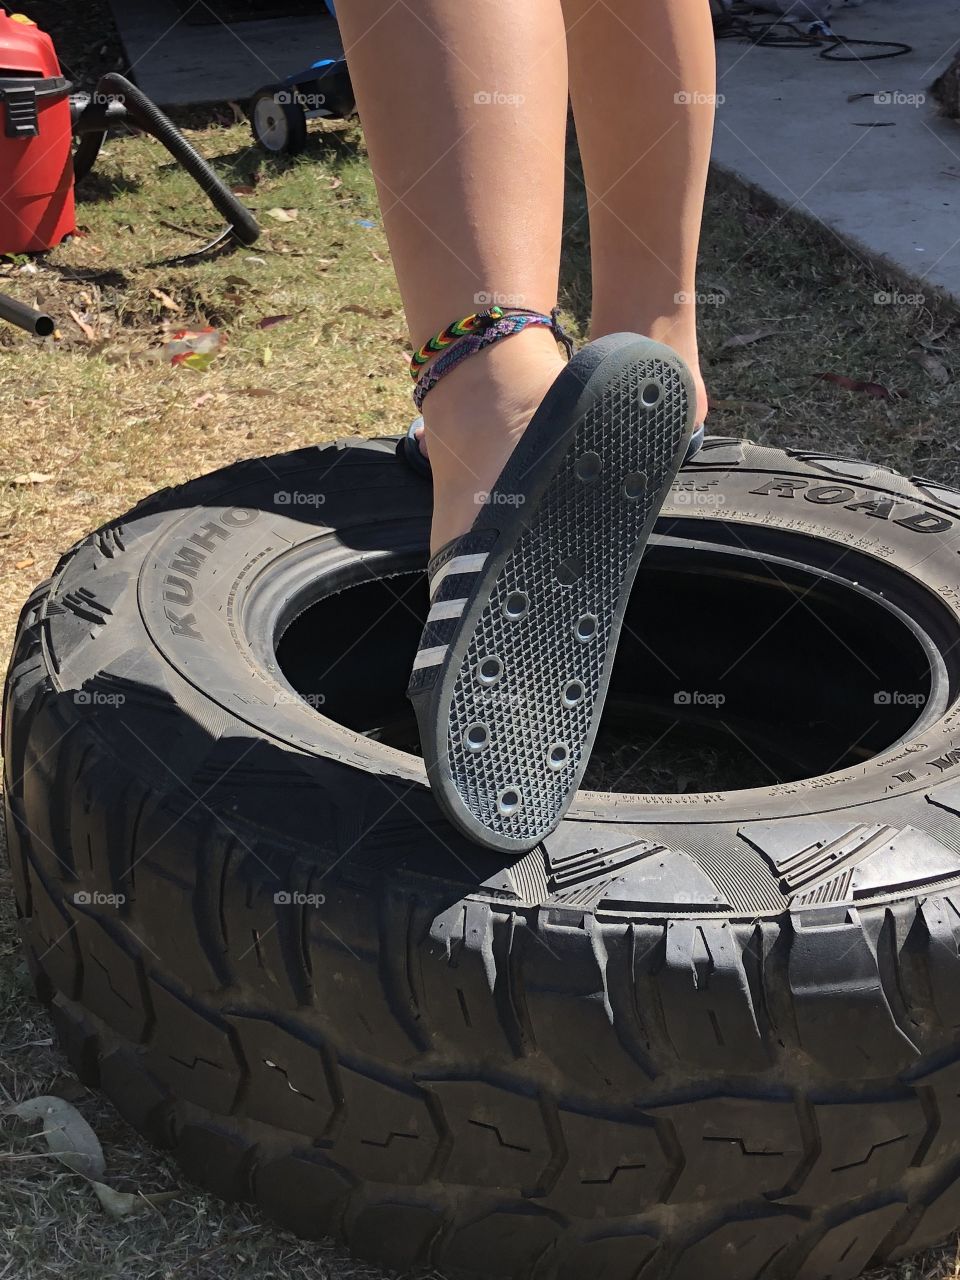 Standing on a tyre